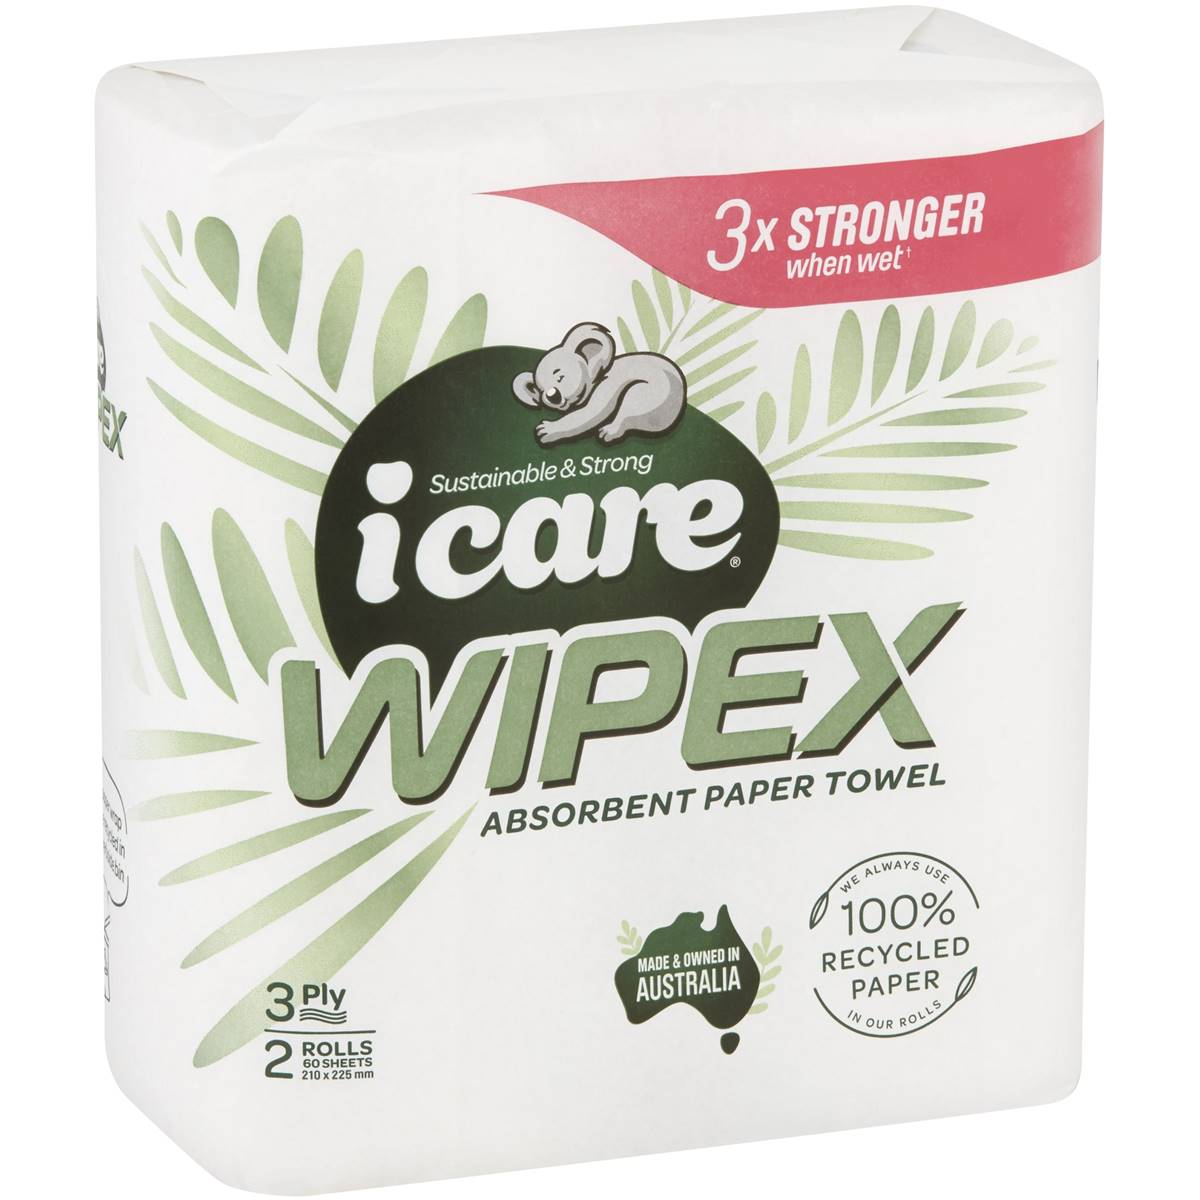 Icare Wipex Recycled Paper Towel White 3 Ply 120 Sheets 2 Pack